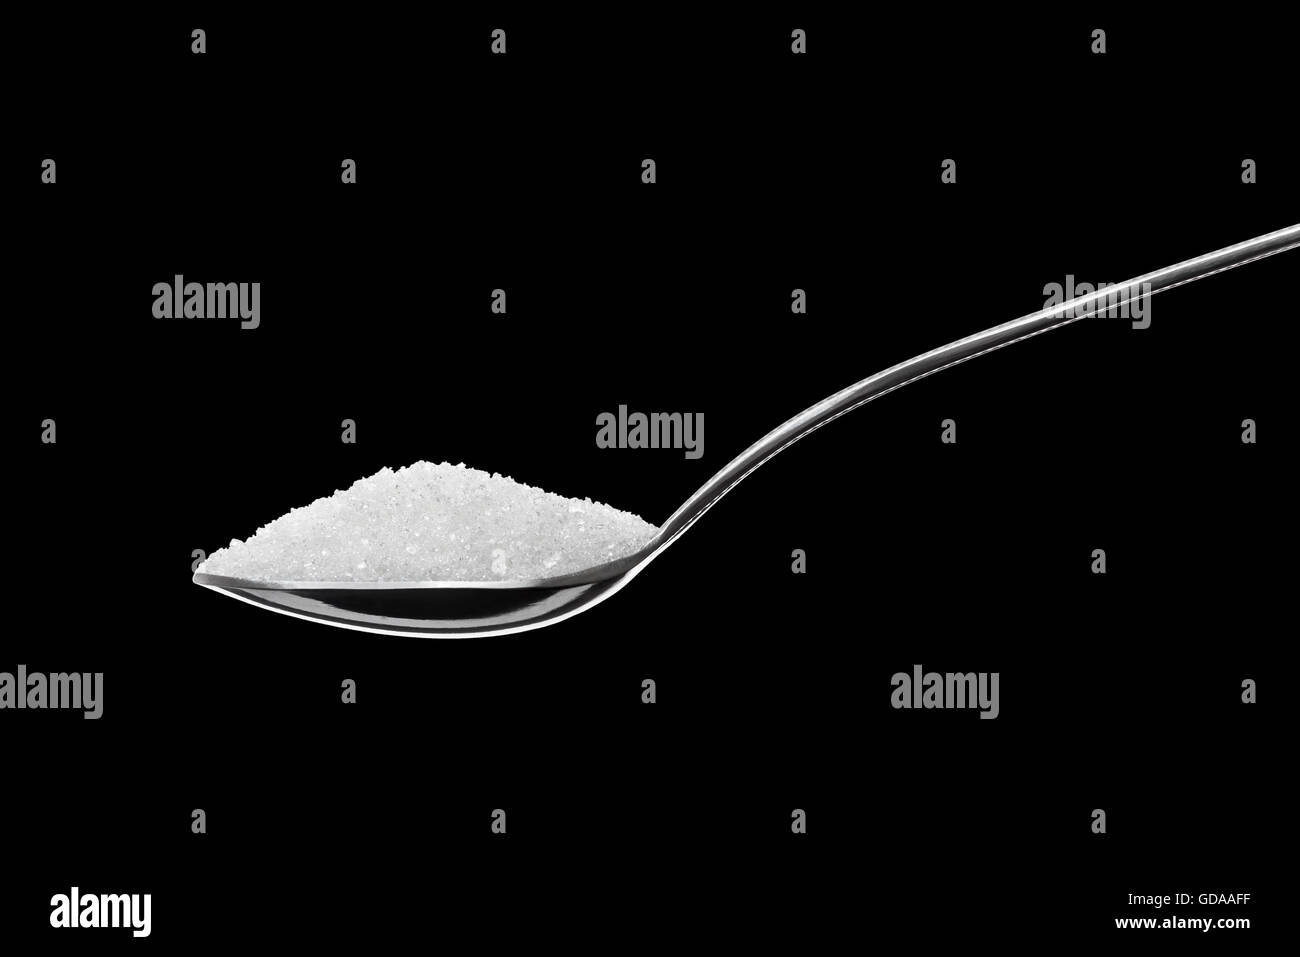 Spoon Full of Sugar Isolated on Black Background Stock Photo